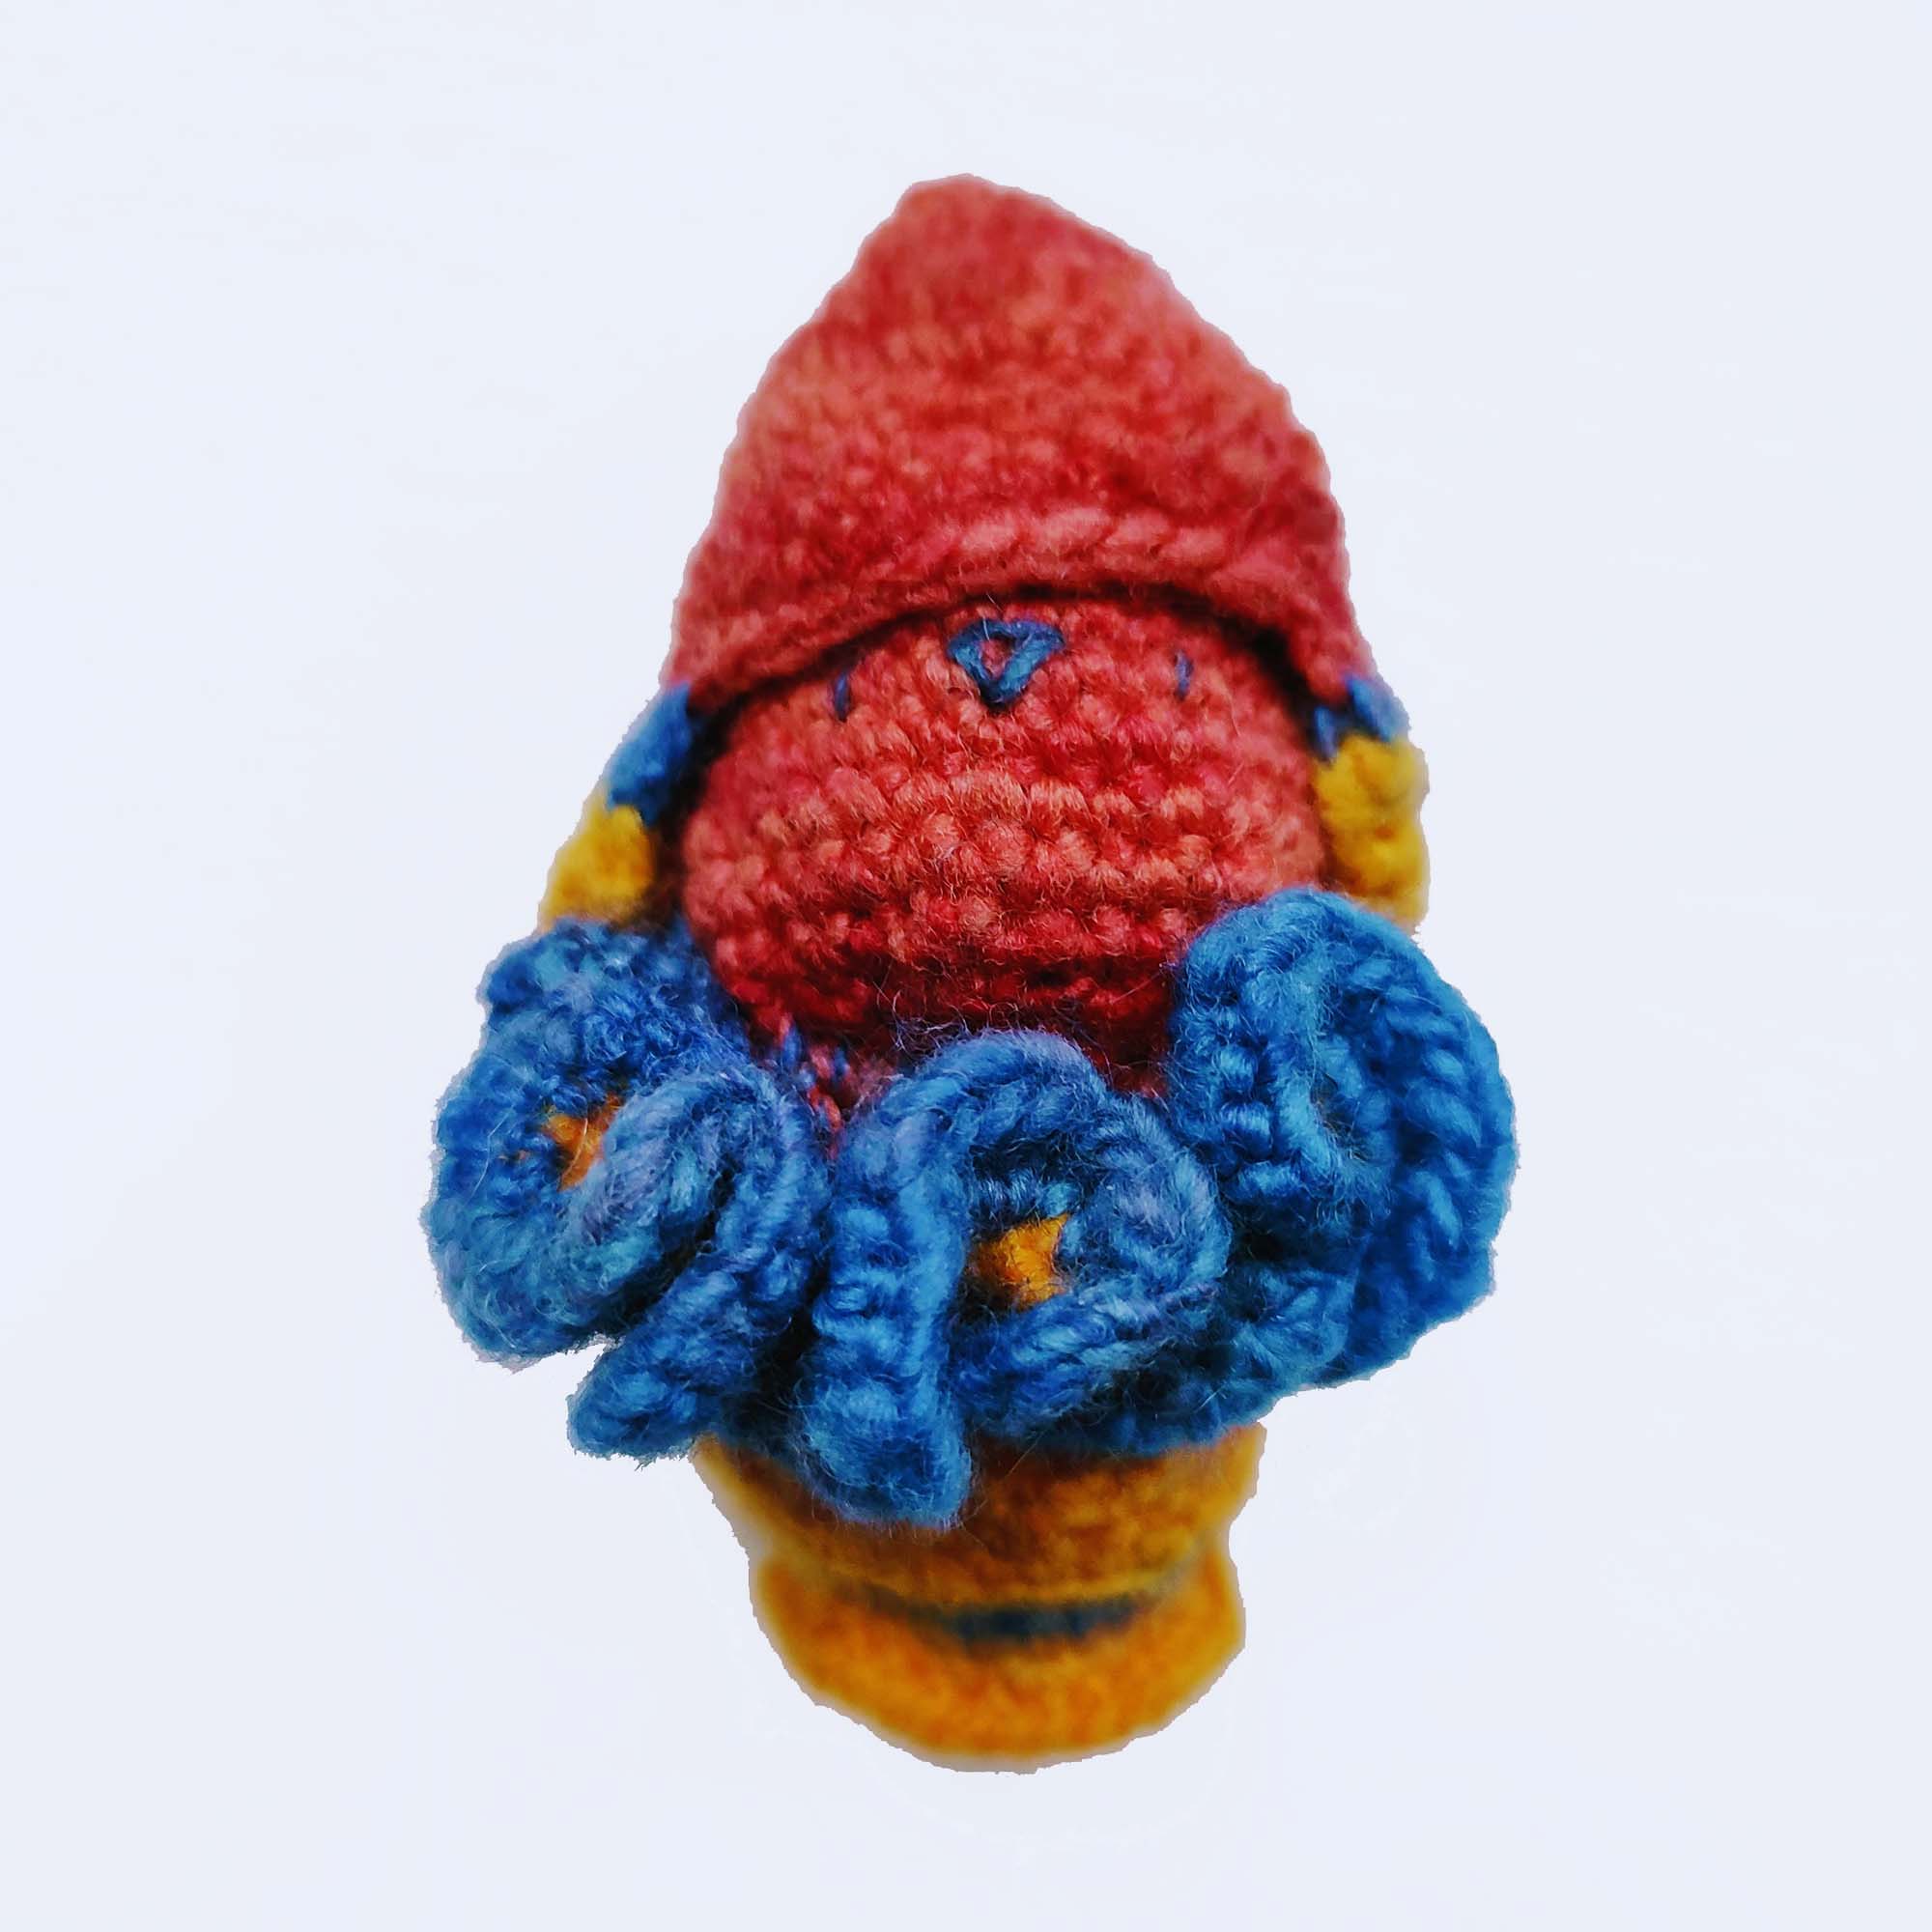 red, blue and yellow crocheted toy bun alien in a rocket pod